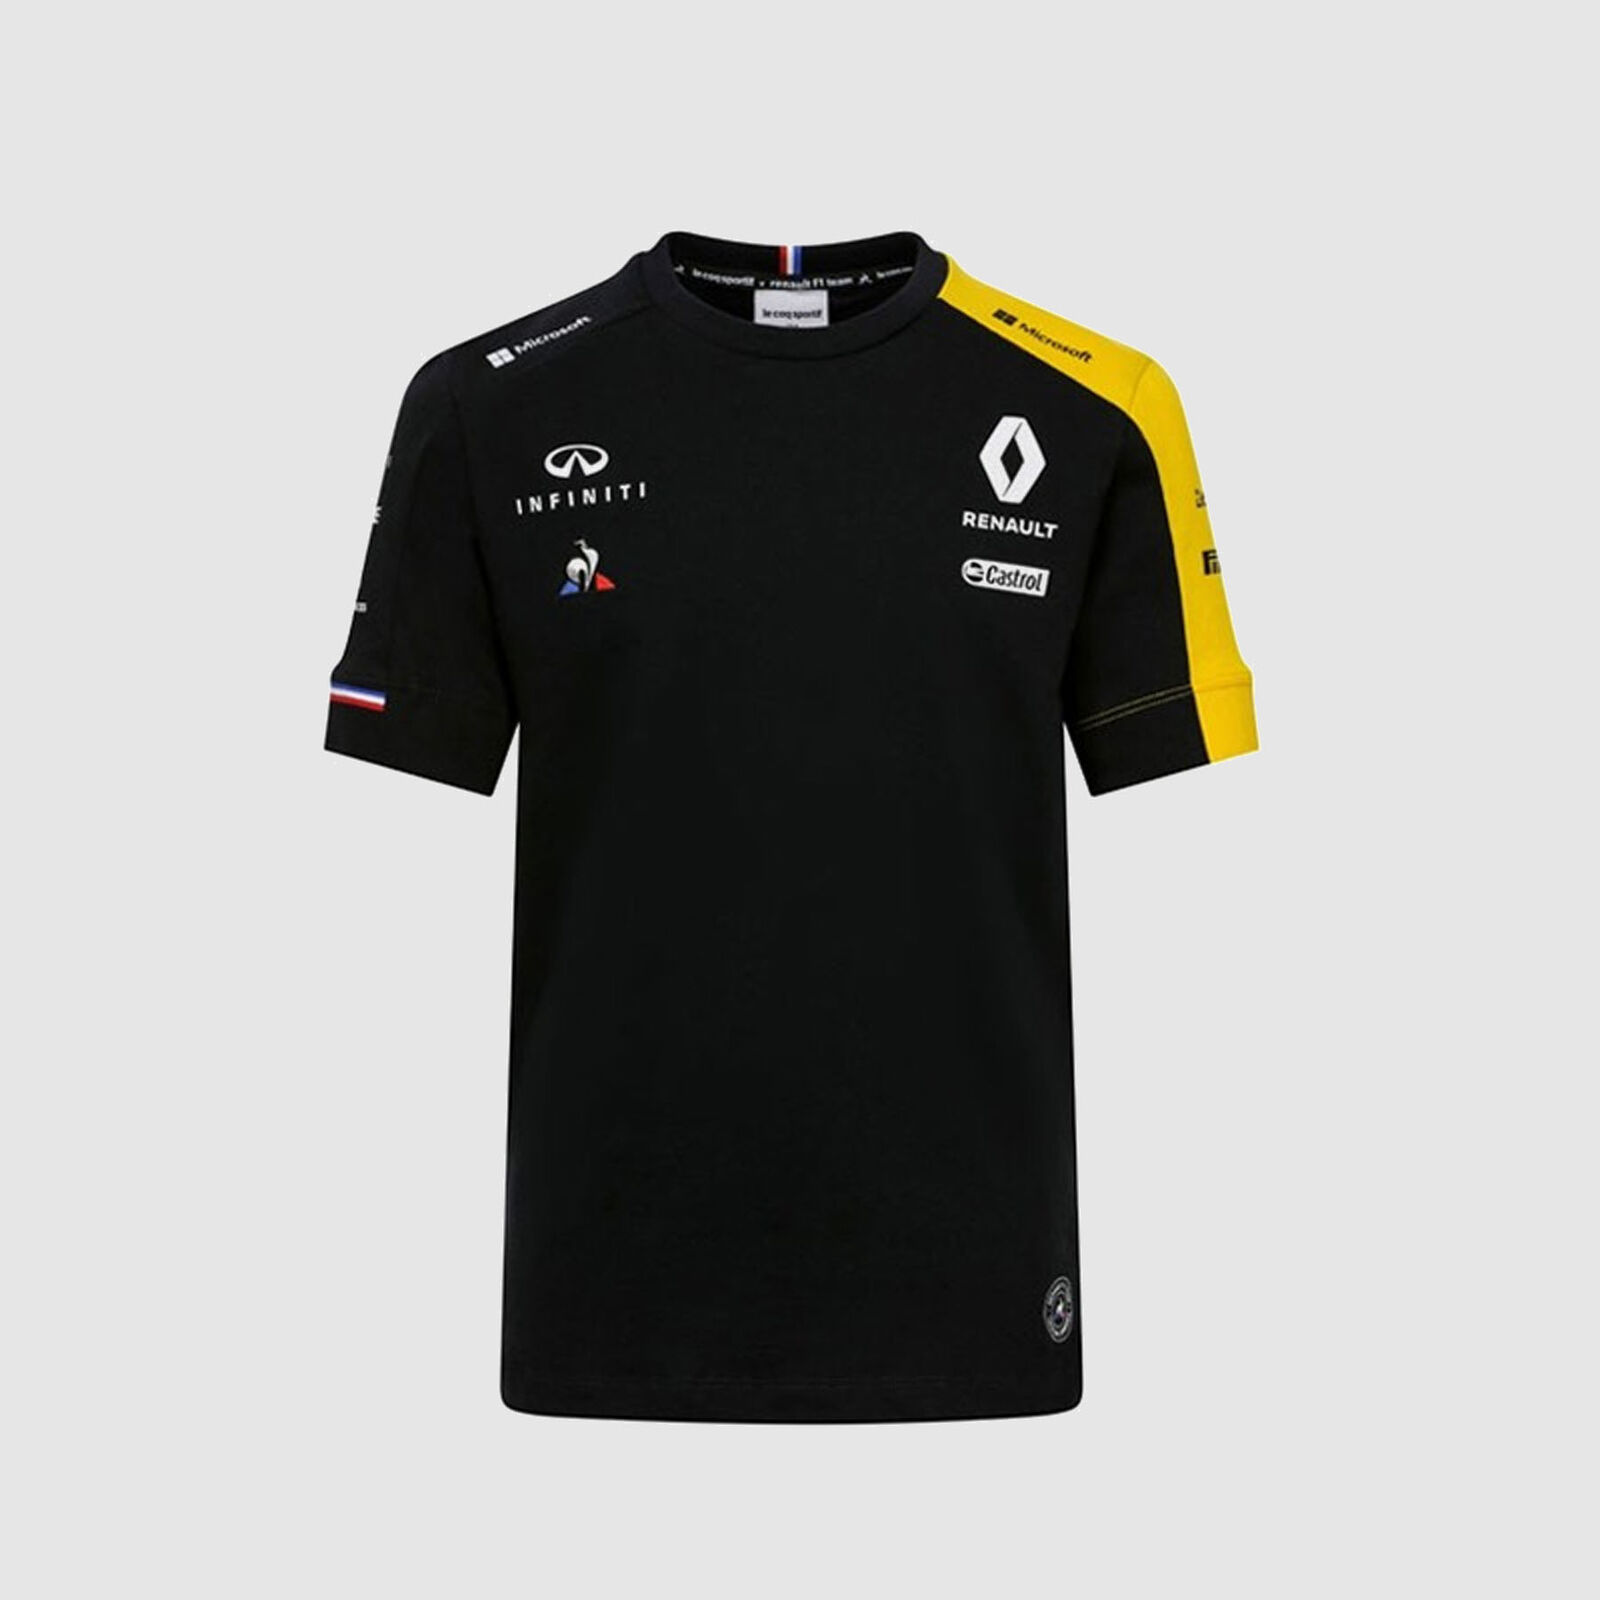 Play sports dead Wetland 2019 Team T-Shirt - Renault F1 | Fuel For Fans